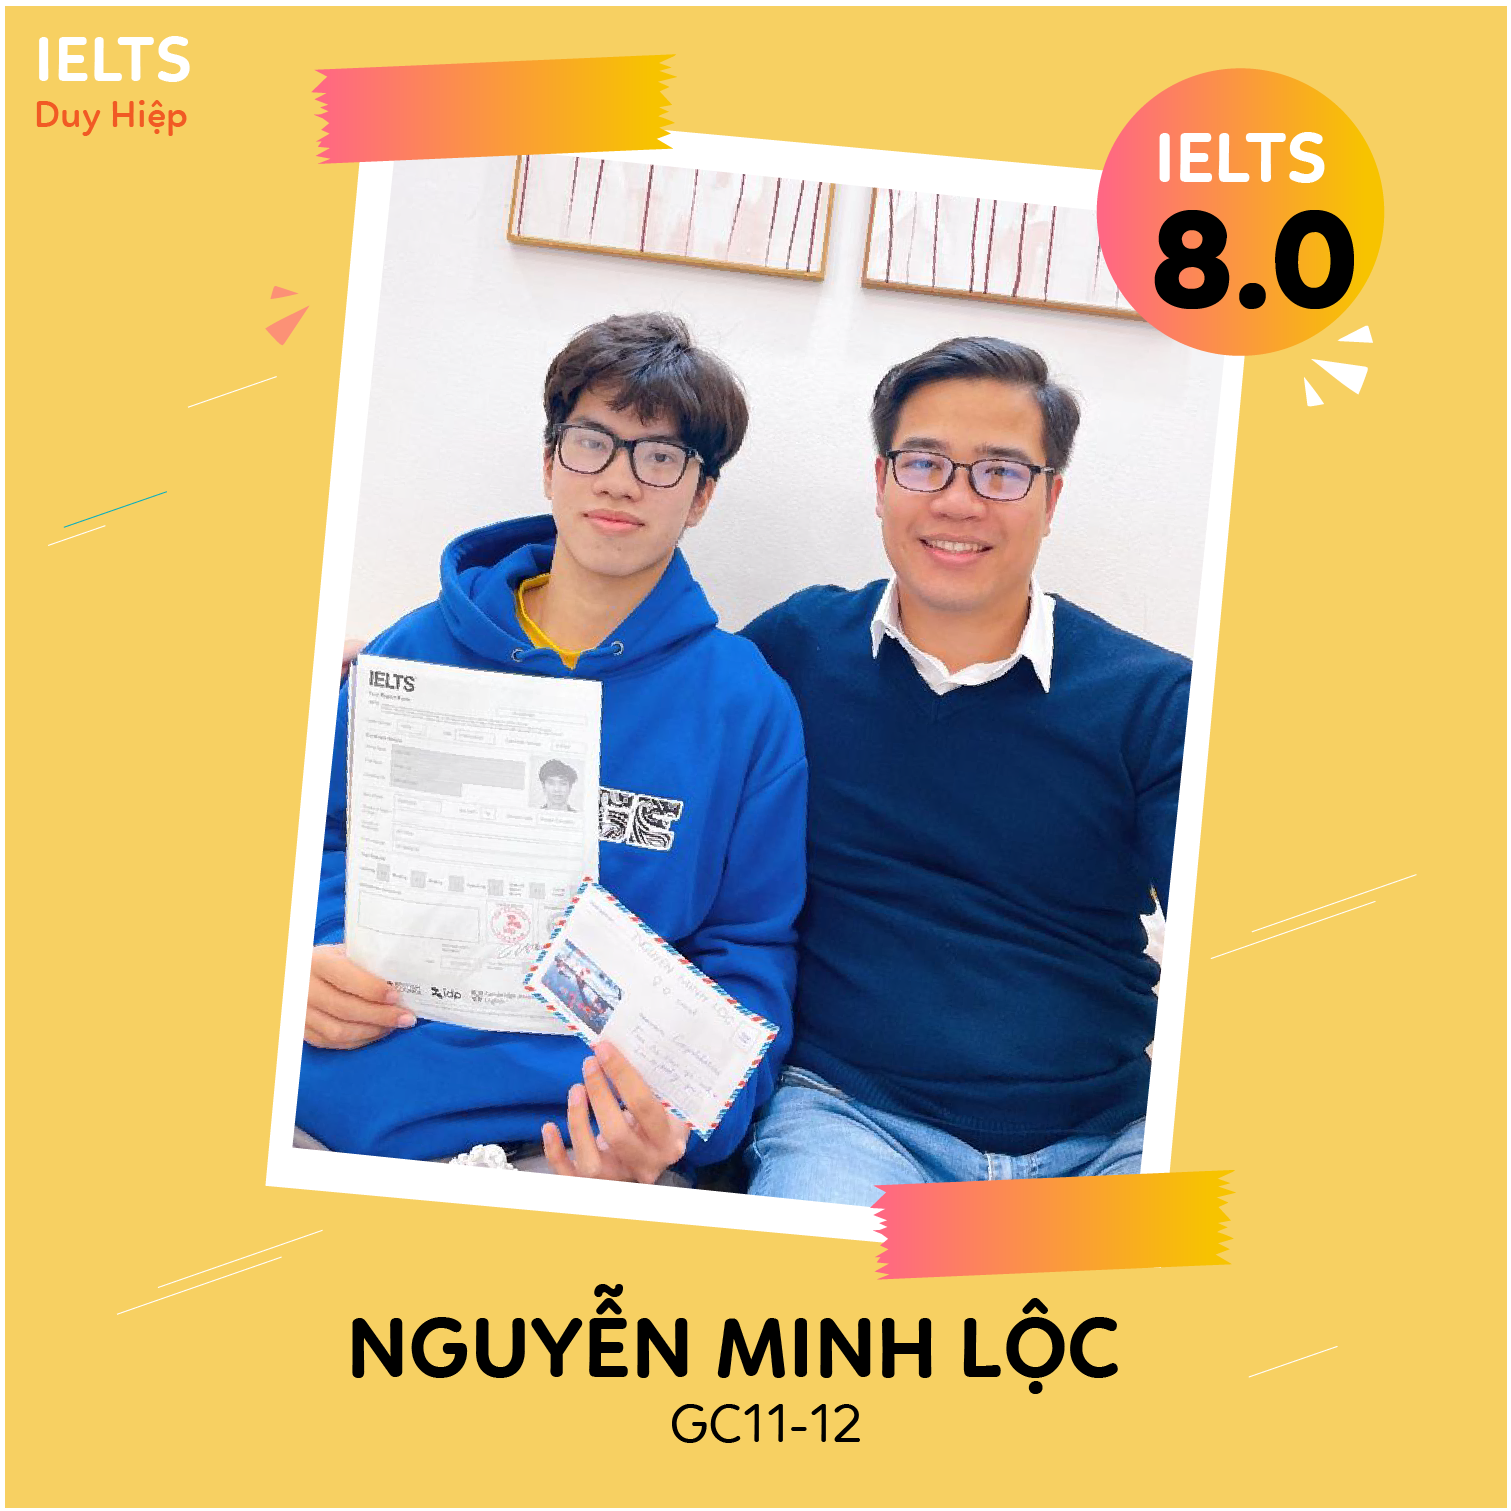 WALL OF FAME - Nguyễn Minh Lộc 8.0 IELTS